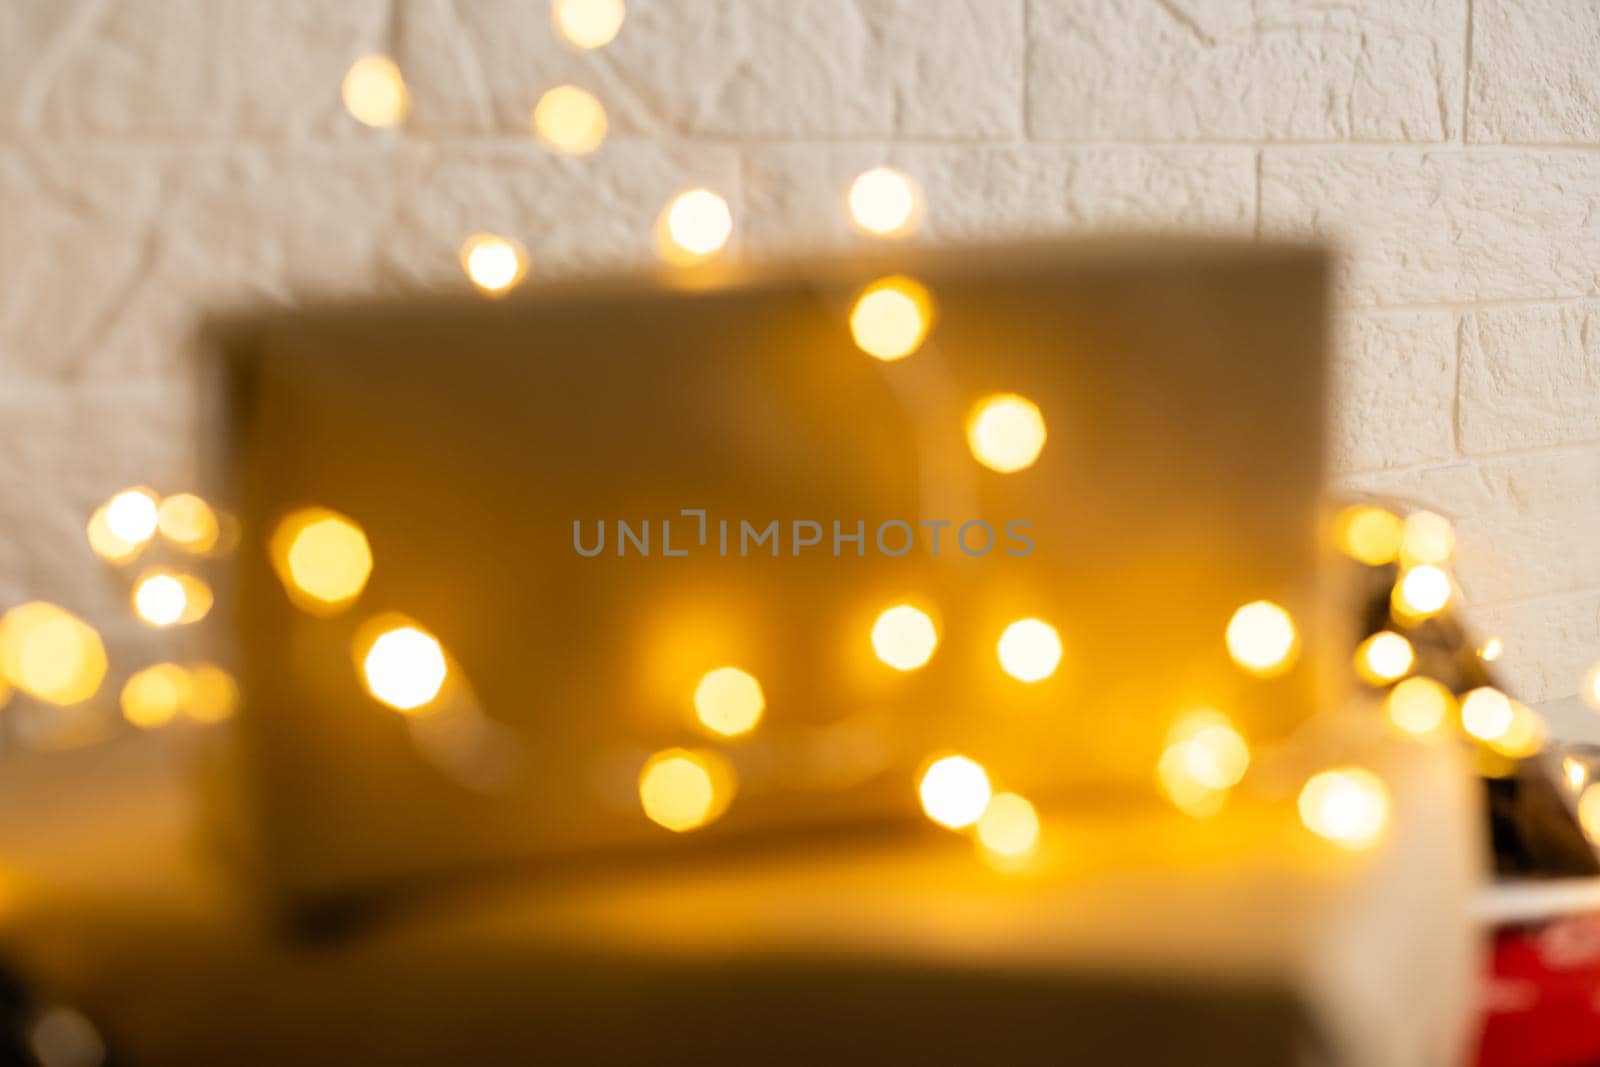 Blurred background. Bright glowing yellow-orange New Year, Christmas garland out of focus.